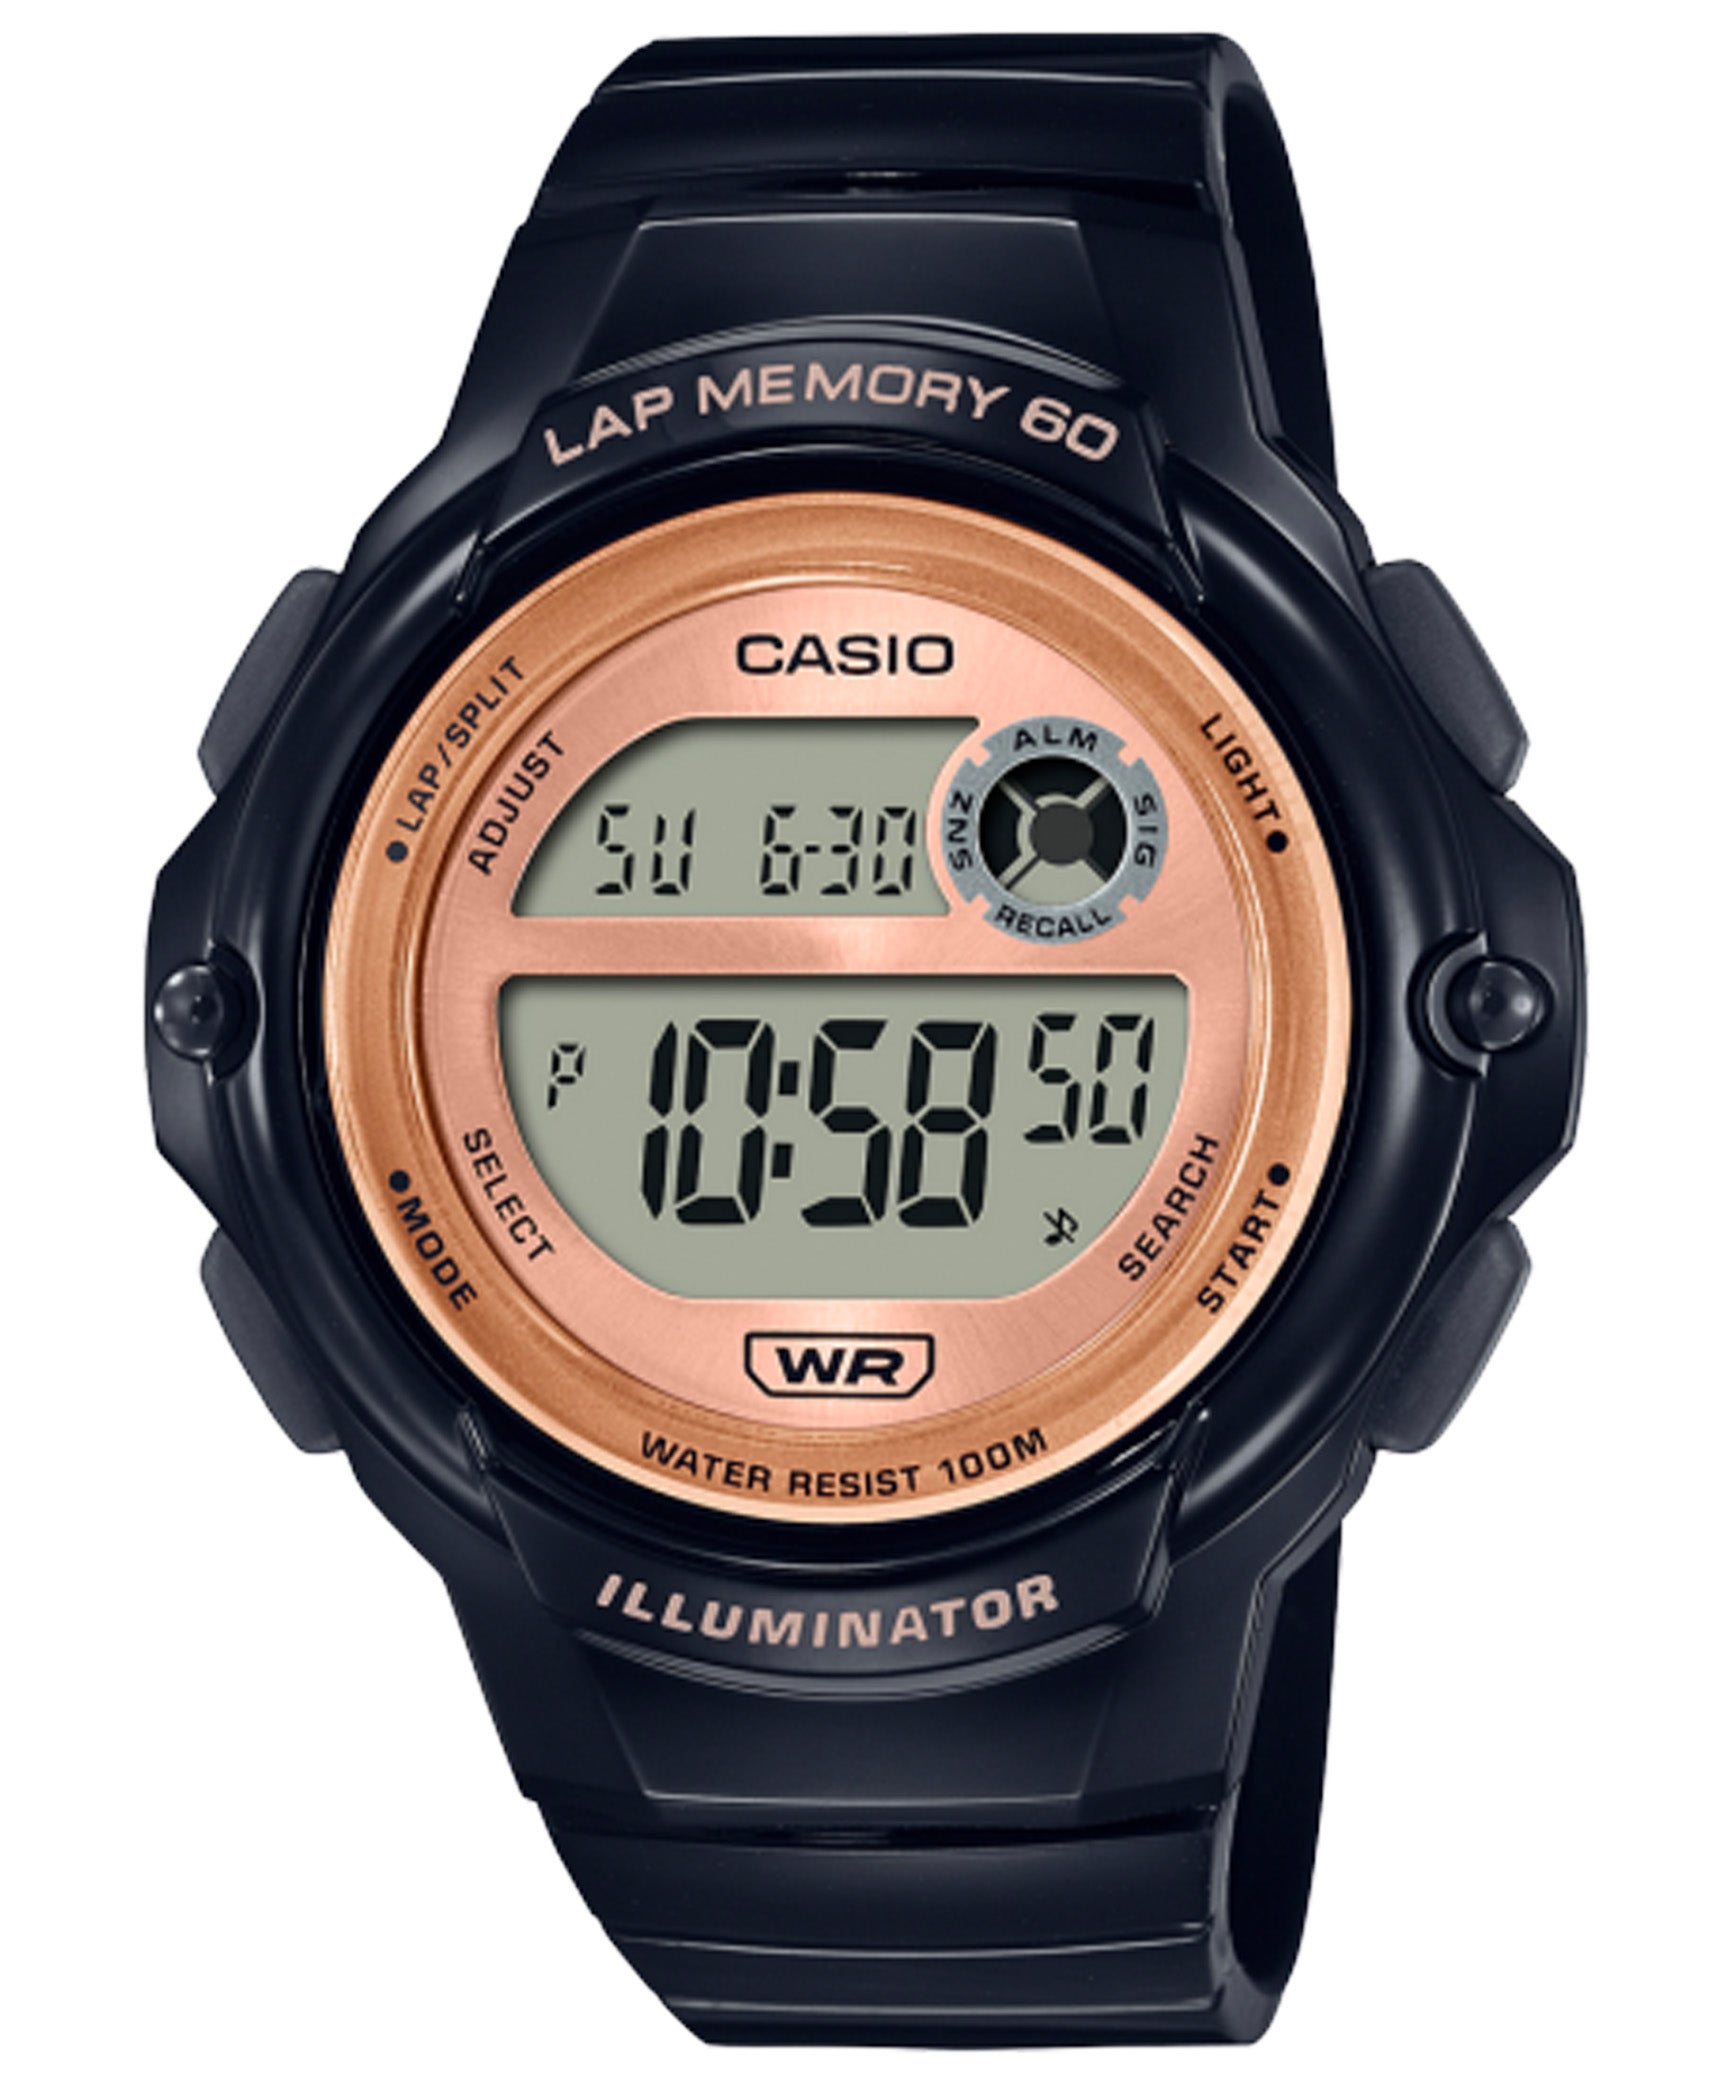 Casio, Women's Watch Sport Collection Digital, Copper Dial Black Resin Band, LWS-1200H-1AVDF